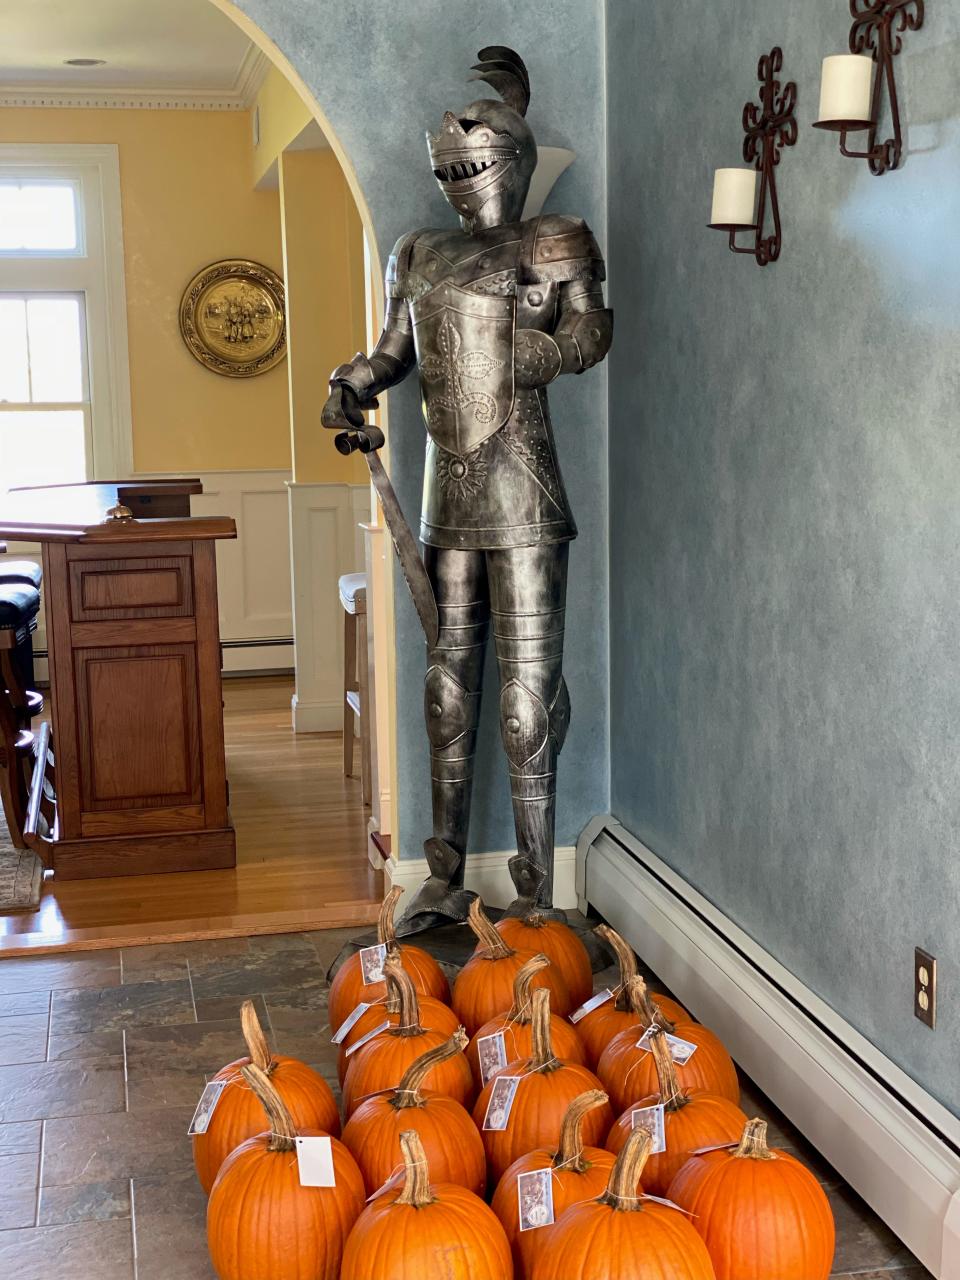 Previous owners Bill and Kristin DiCroce, of Falmouth, had a knight placed in a corner of the foyer to greet visitors to the former carriage house of the 19th-century Pope estate in Cohasset. It is now a private home.